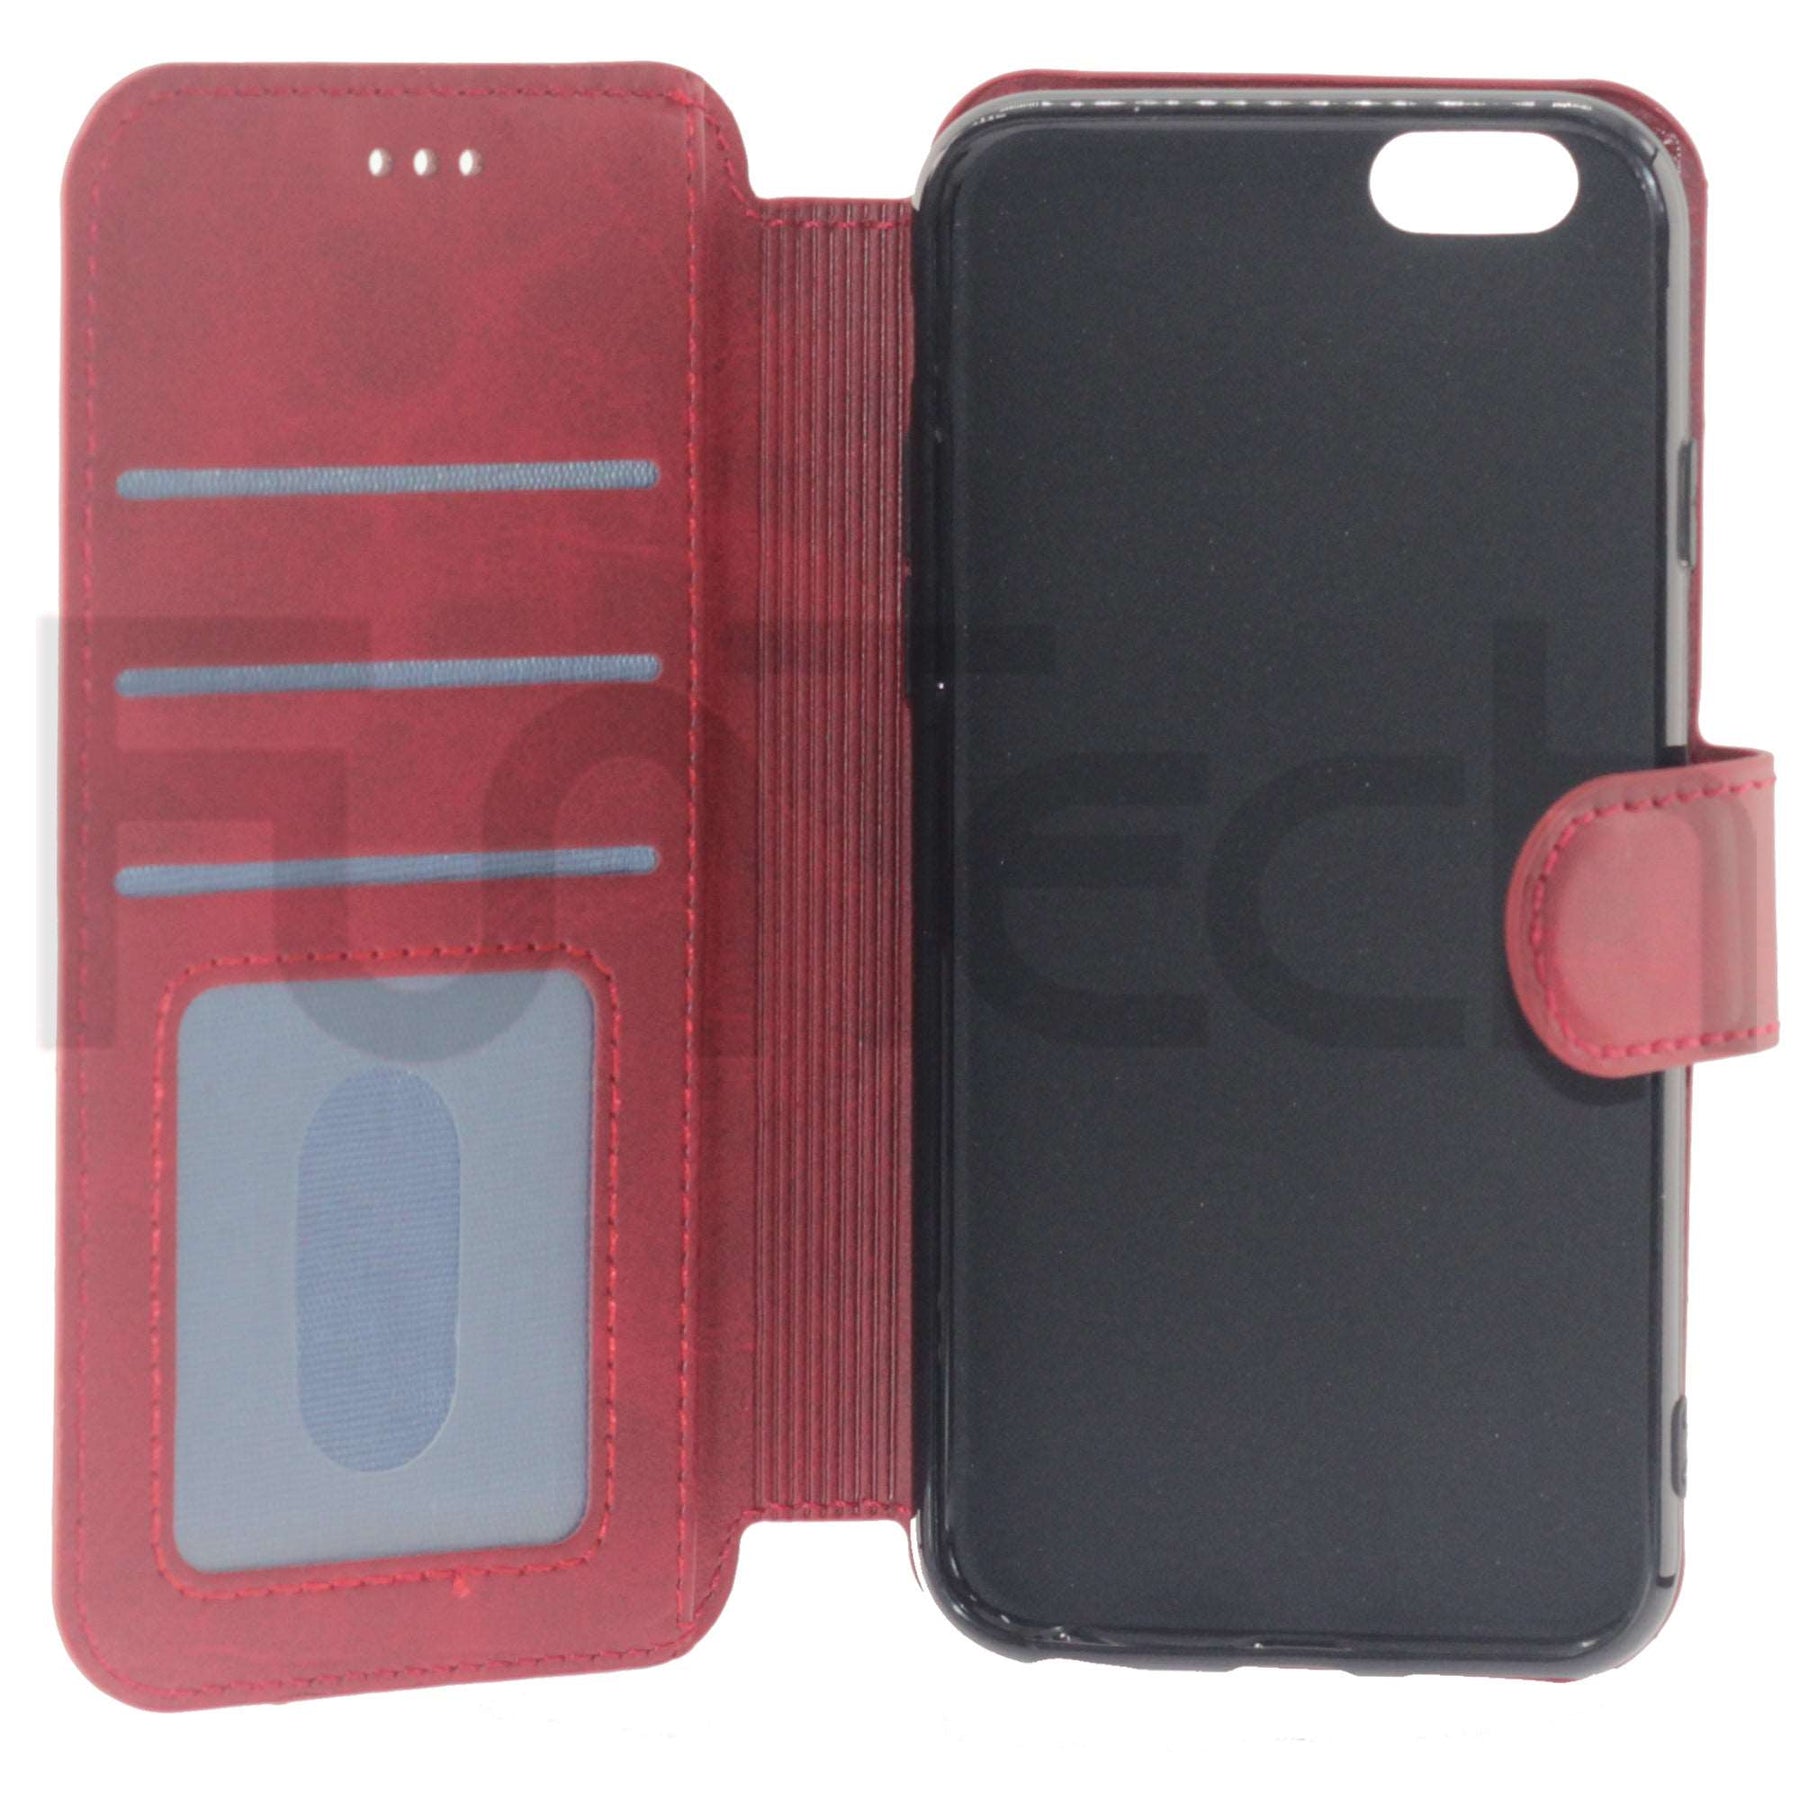 Apple, iPhone 6/6S, Leather Wallet Case, Color Red.